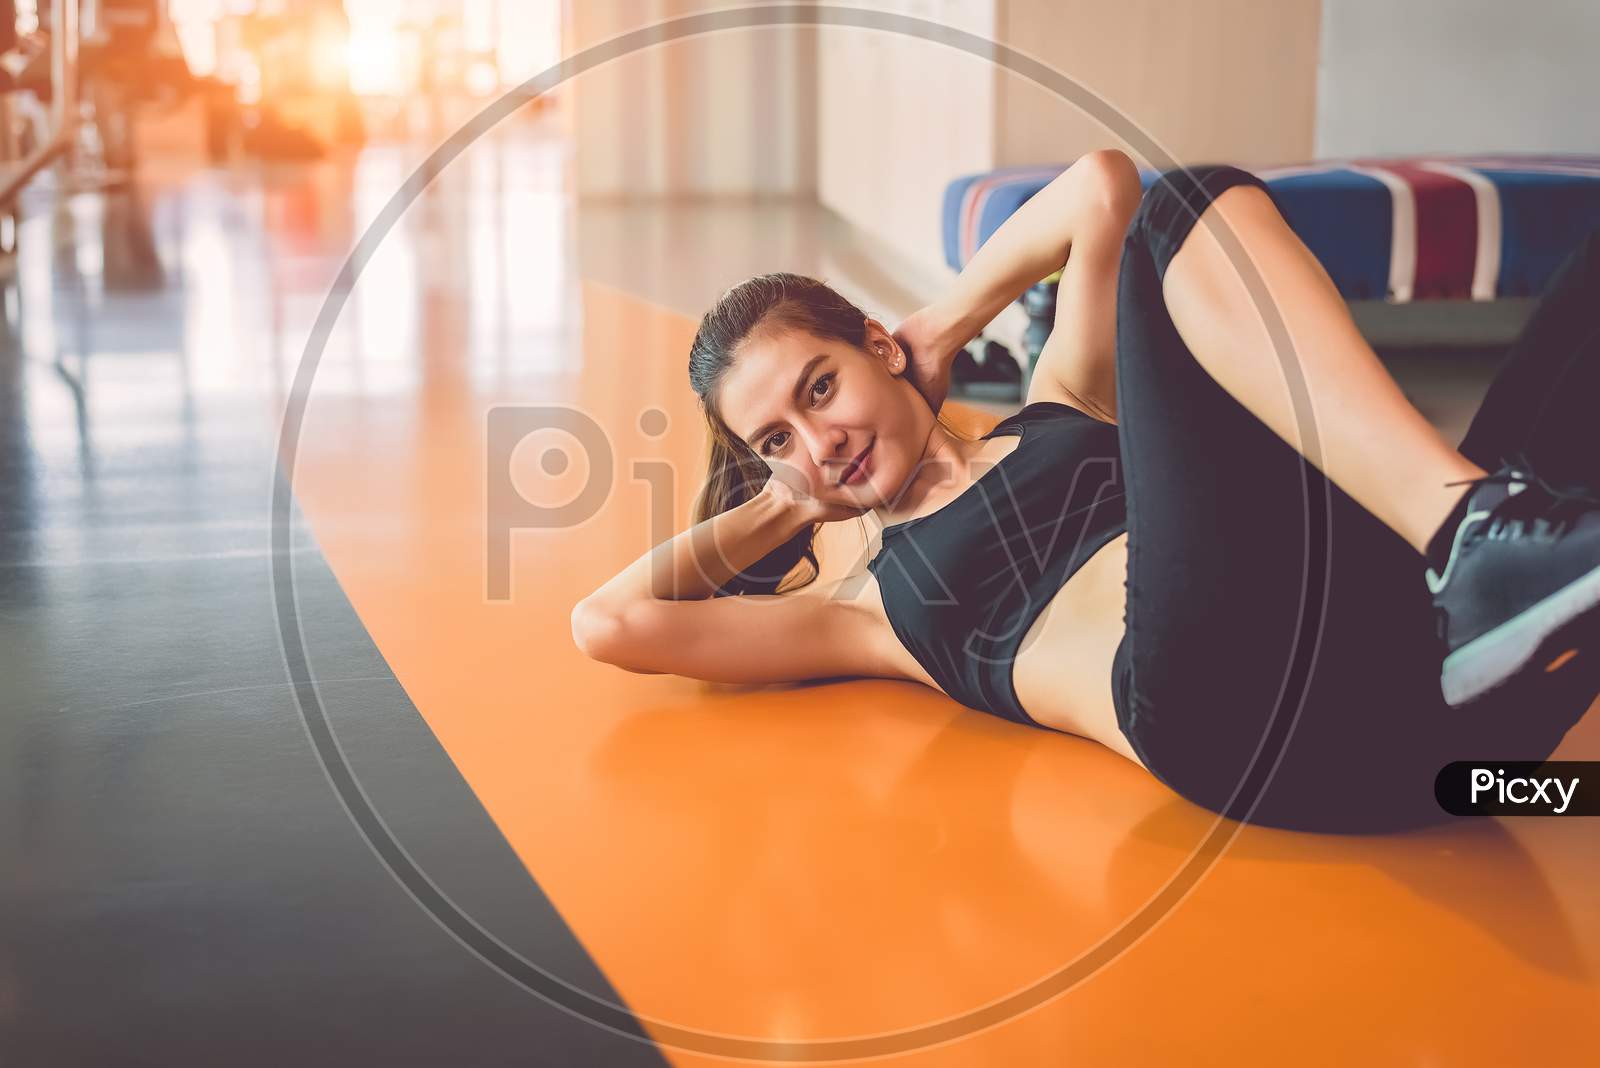 Sport Woman Doing Sit Up In Fitness Sport Training Club With Sport Equipment And Accessories Background. Workout Crunch And Bodybuilder. Lifestyles Leisure And Indoors Activity. Cardio Program Concept